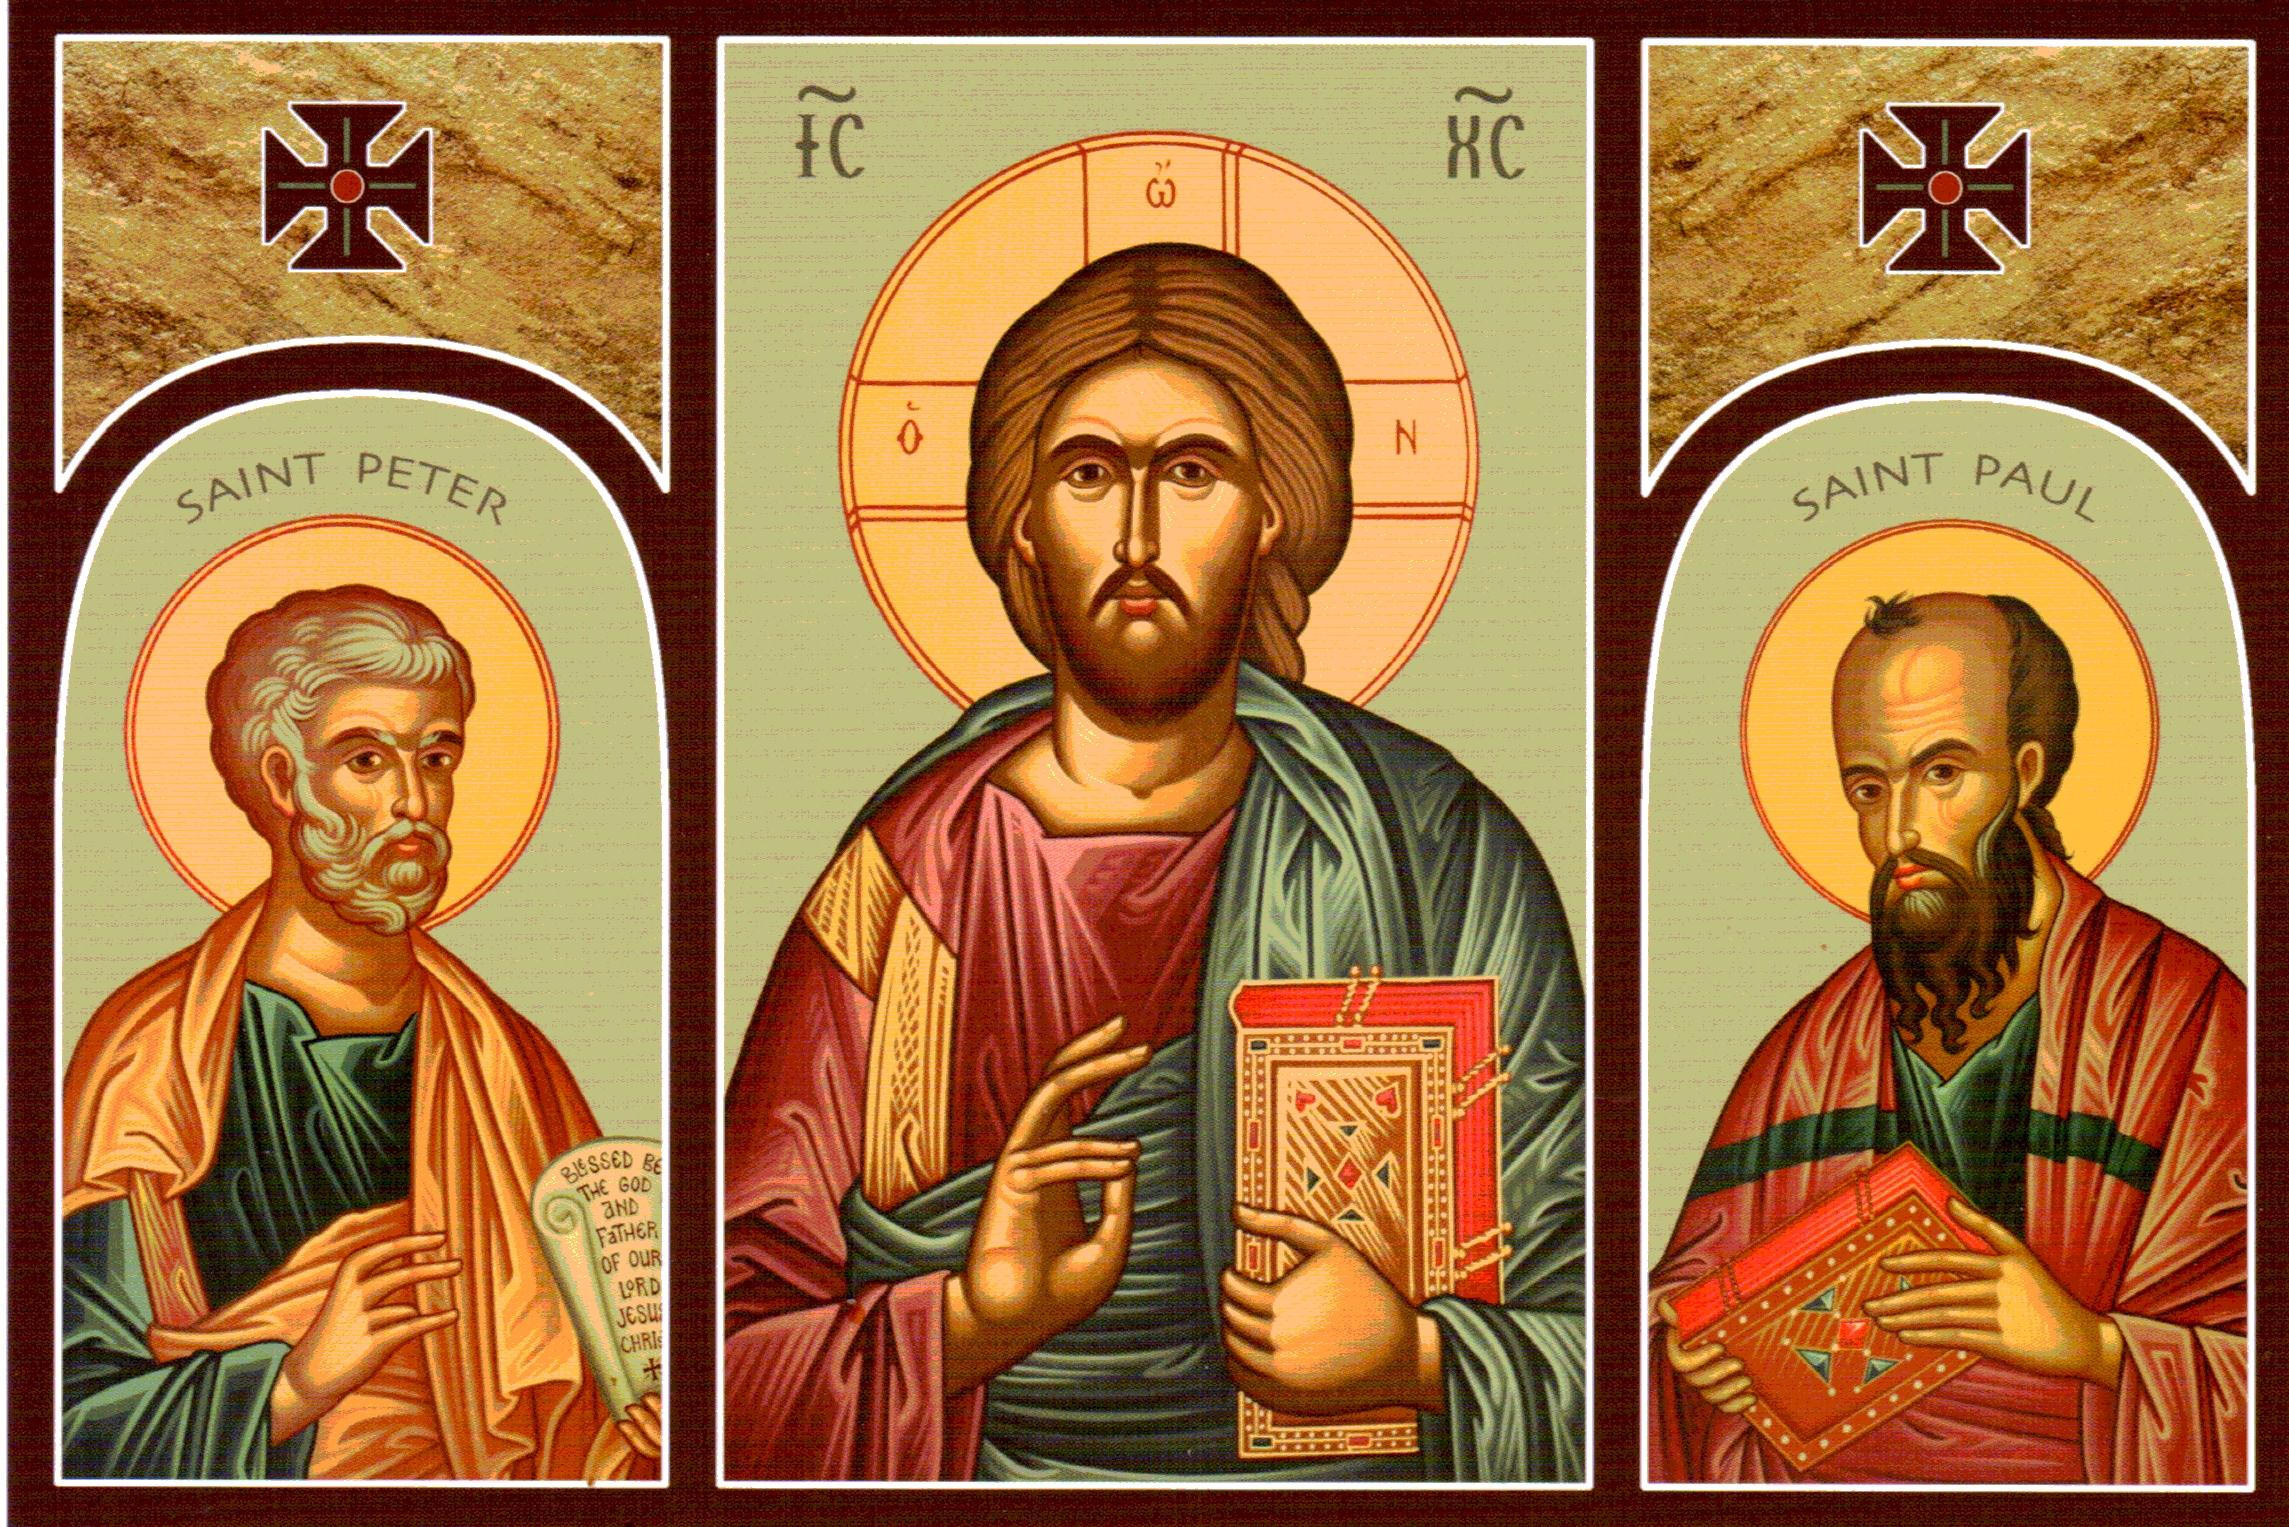 Sts. Peter and Paul Have Several Similarities and ...